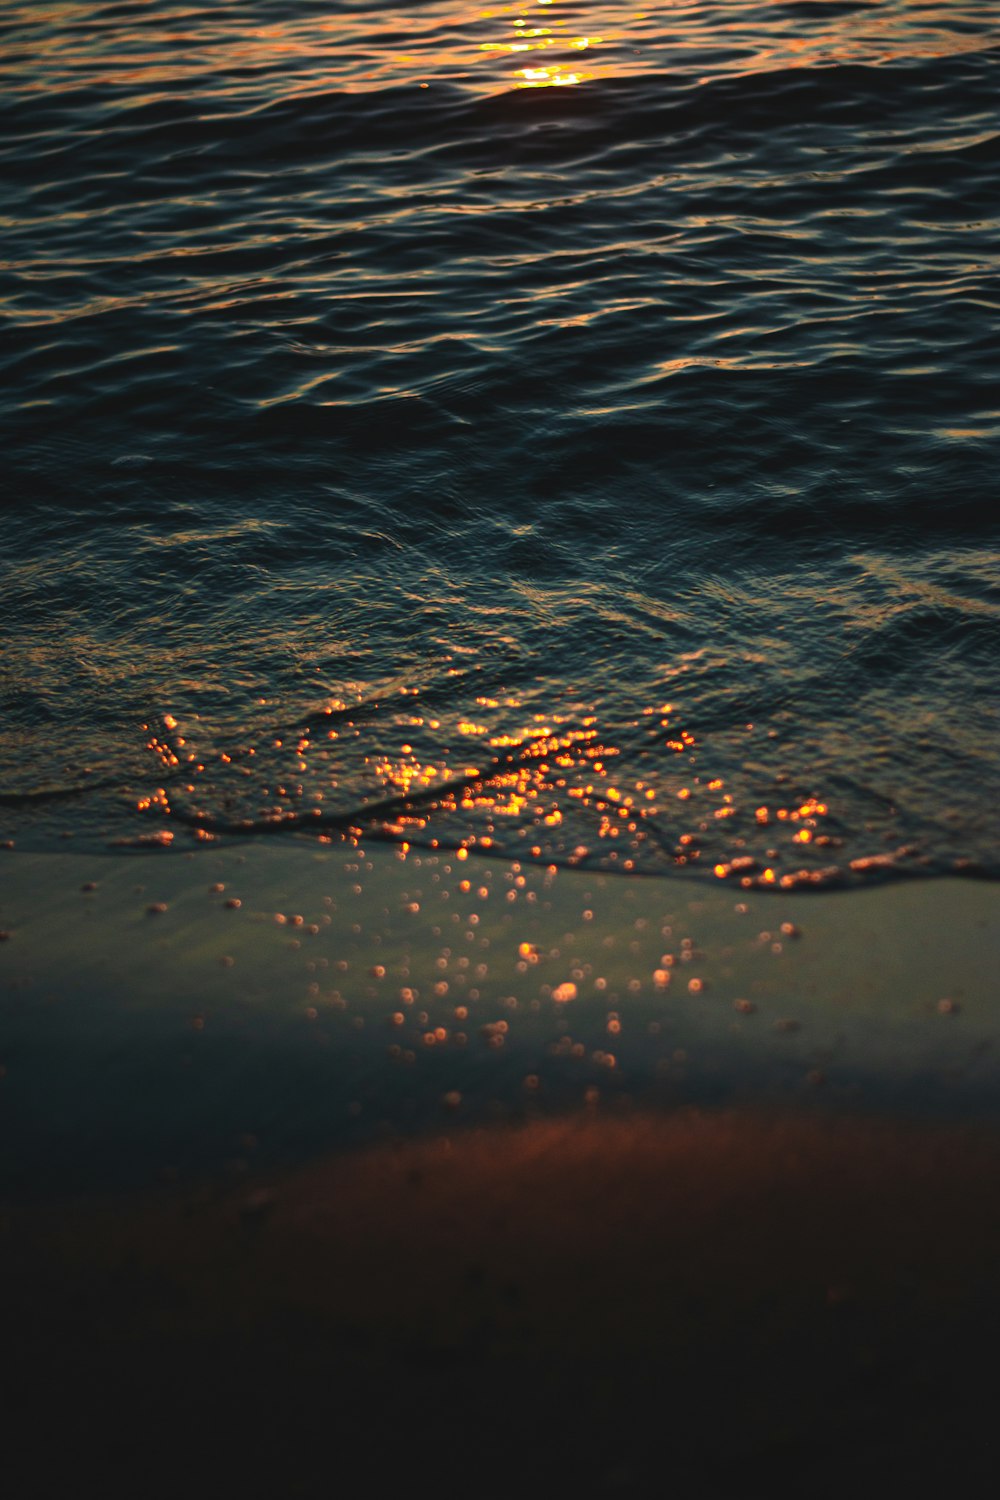 water droplets on body of water during daytime